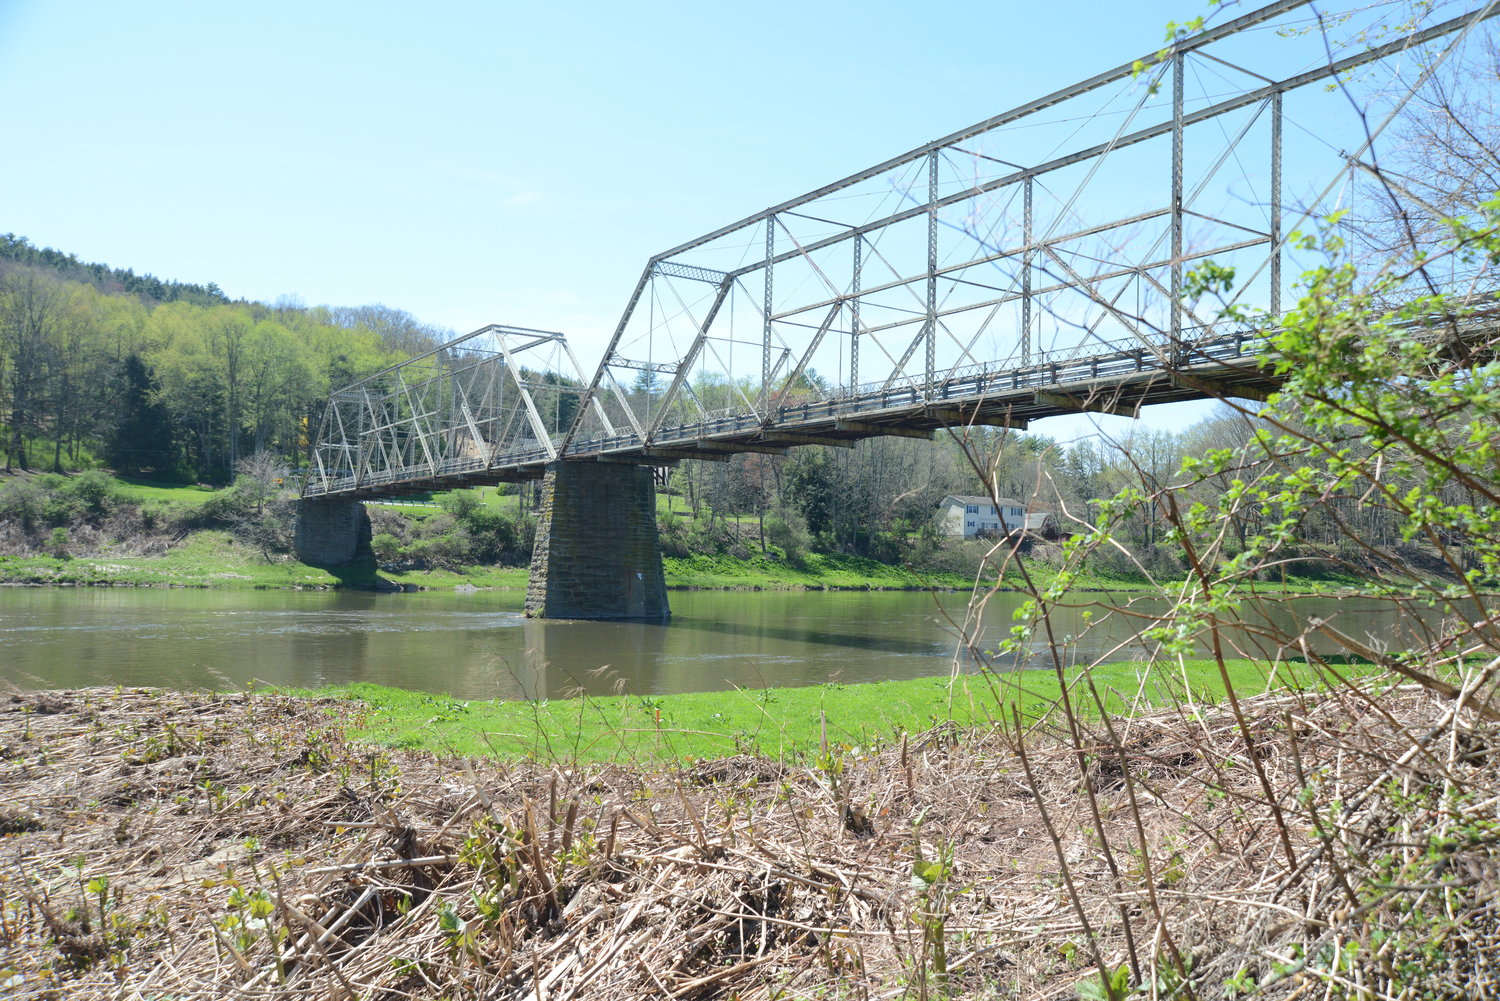 Open or not, some residents feel that historic bridge is tied into the fabric of the community.